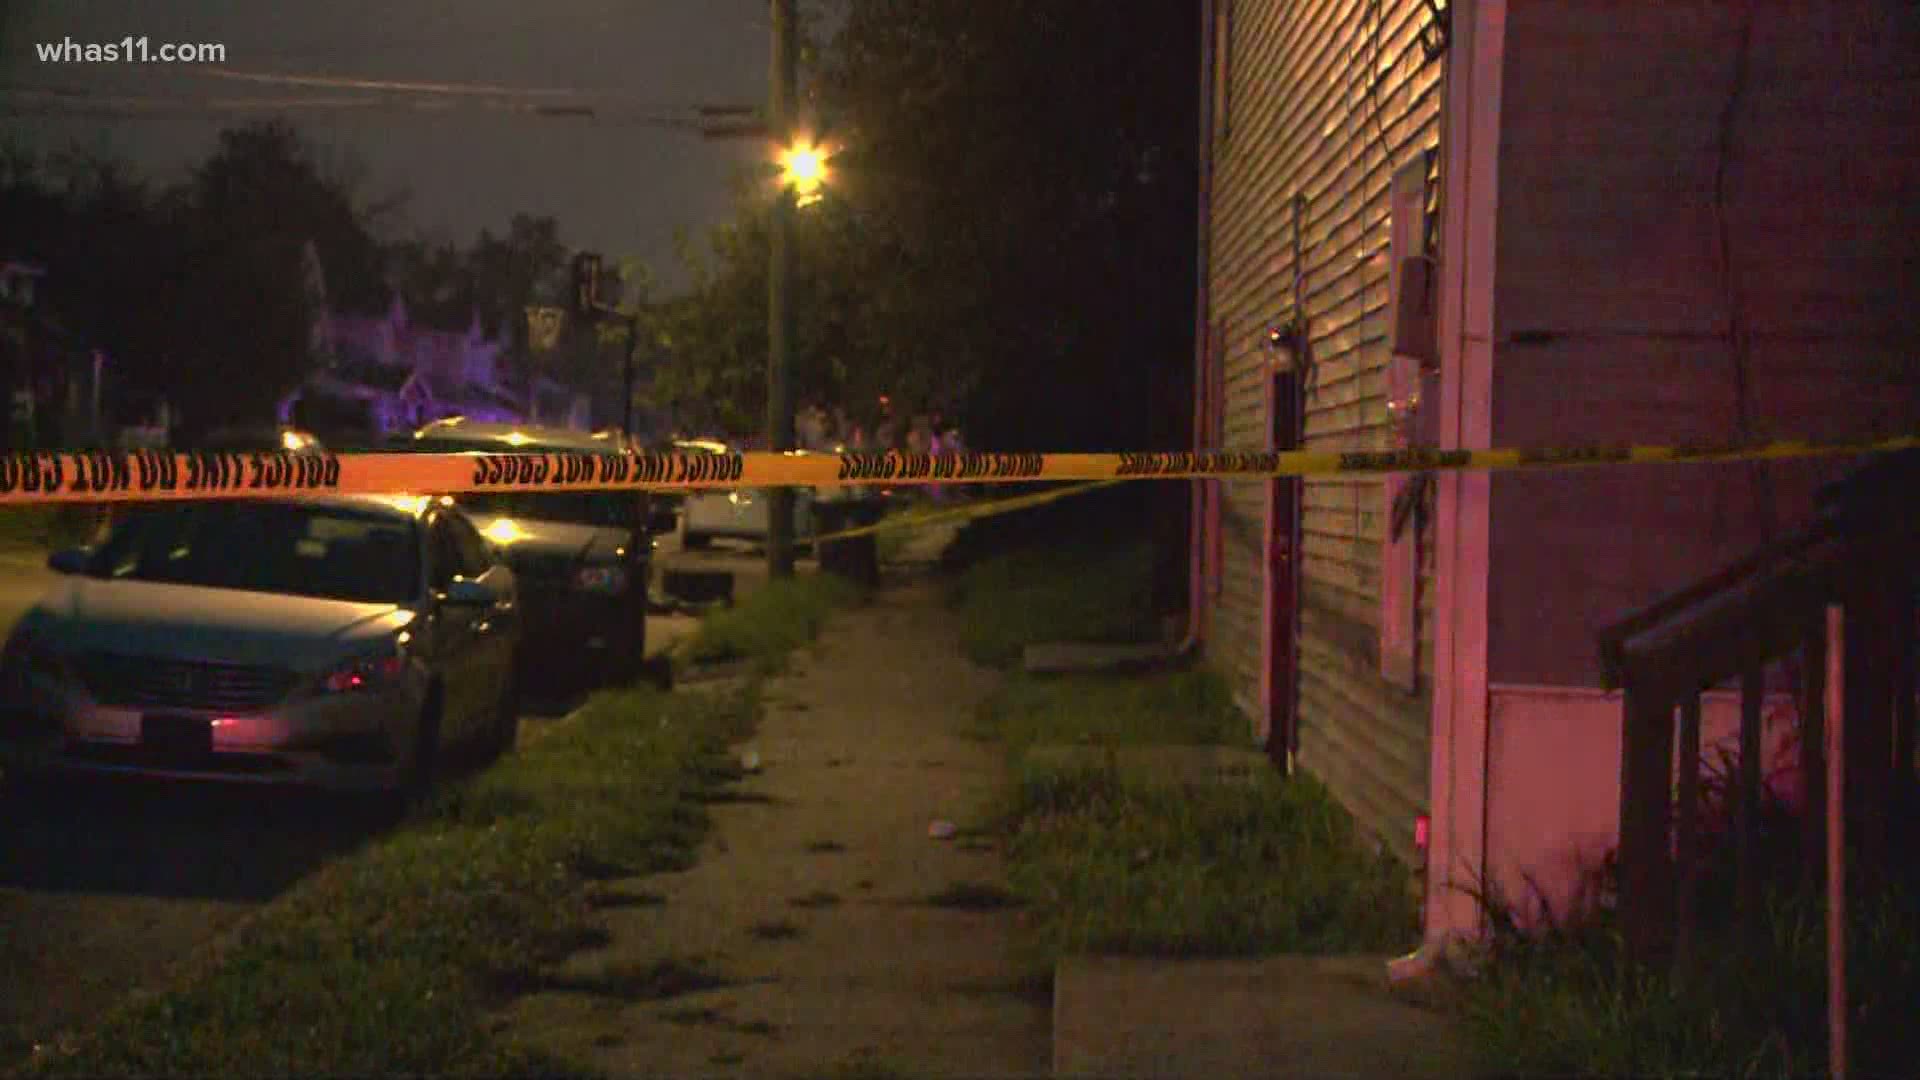 A 16-year-old girl was killed and a 15-year-old boy was injured in a shooting in the 2200 block of Cecil Ave.